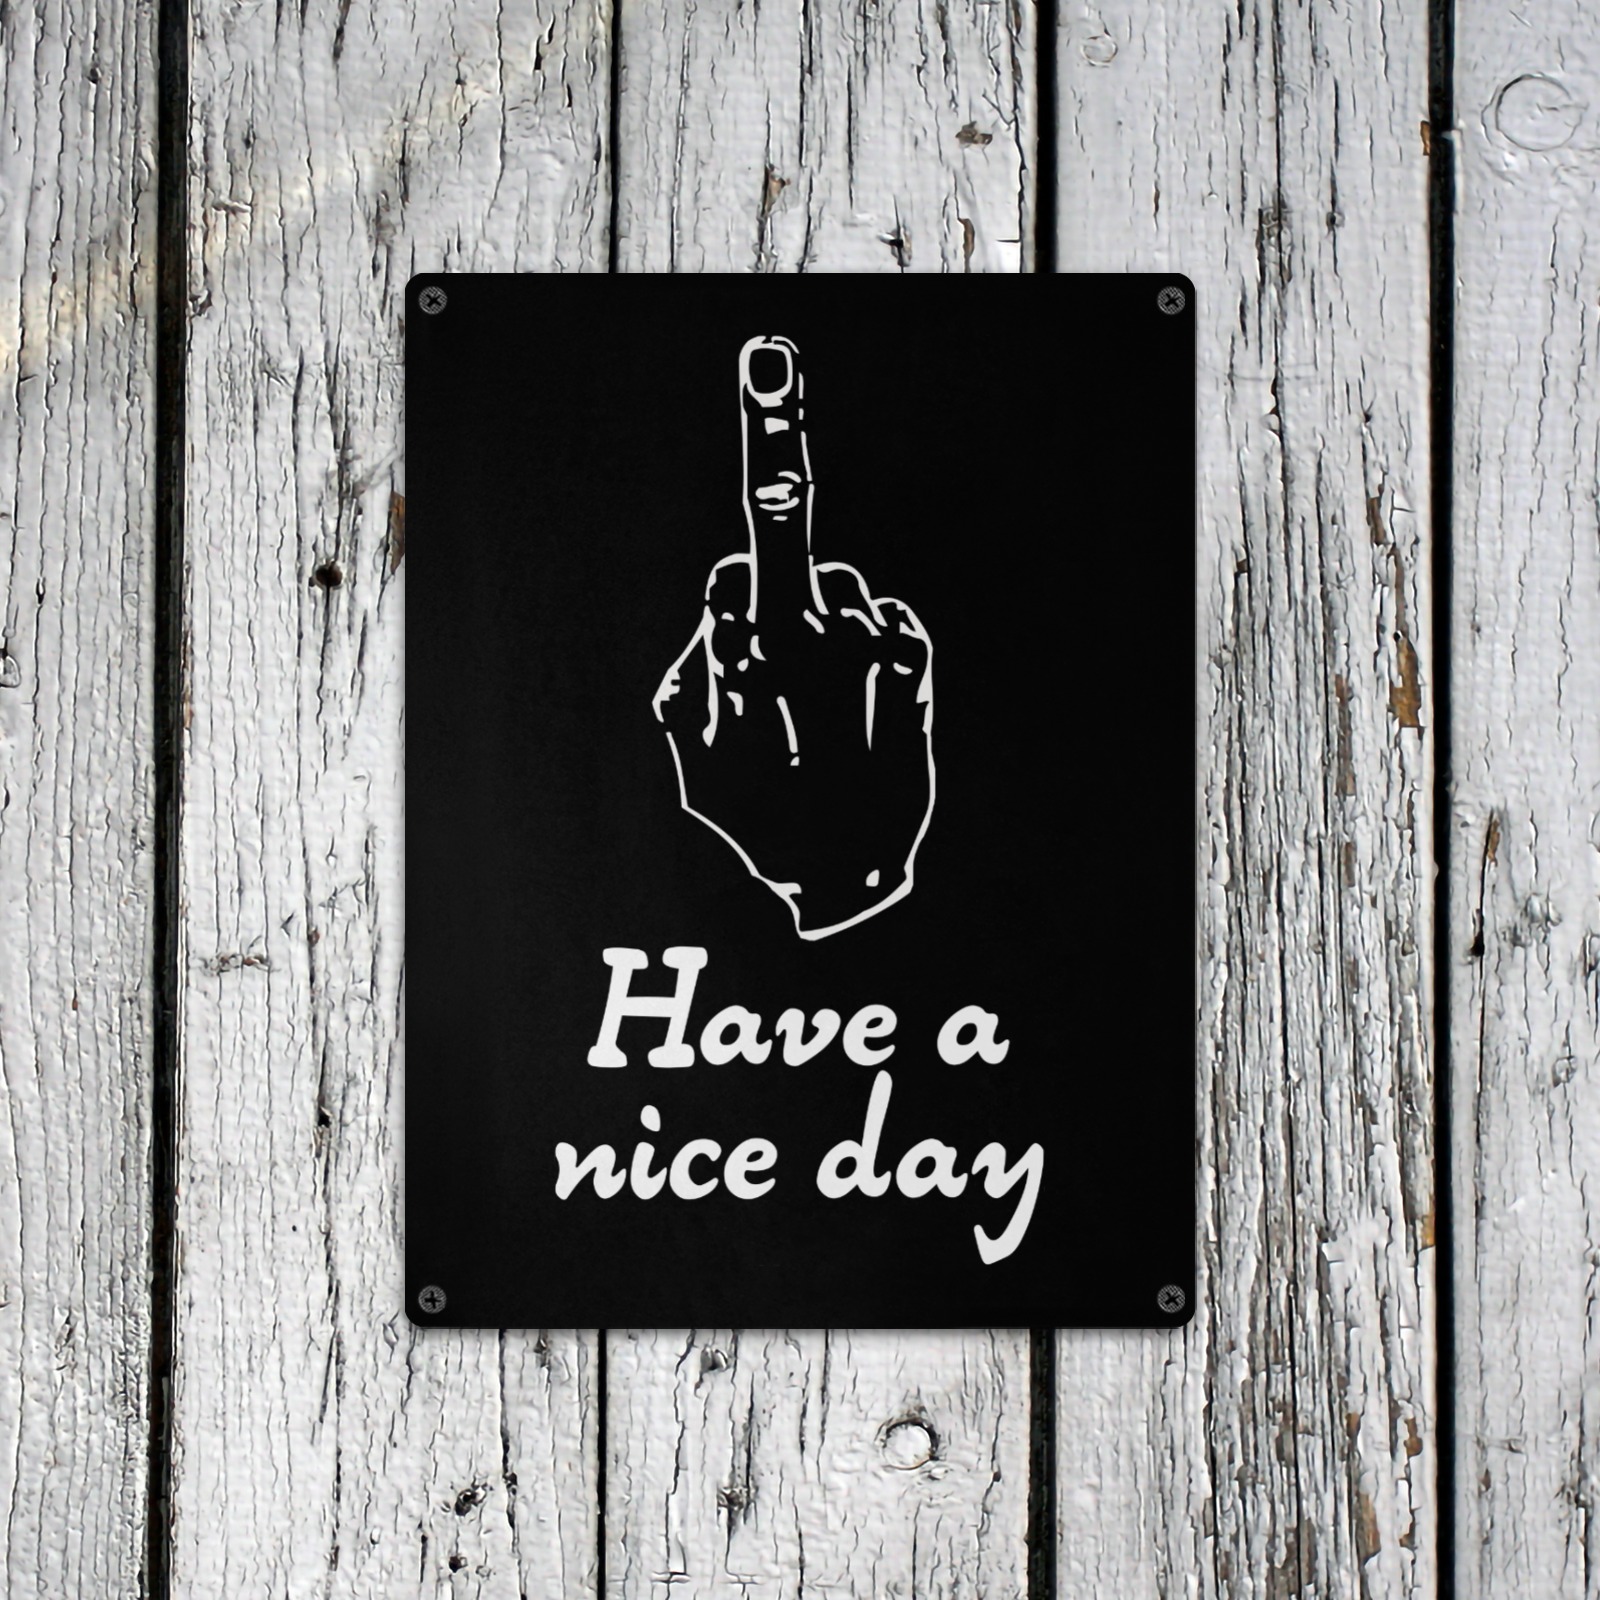 Adult humor. Have a nice day and middle finger. Metal Tin Sign 12"x16"